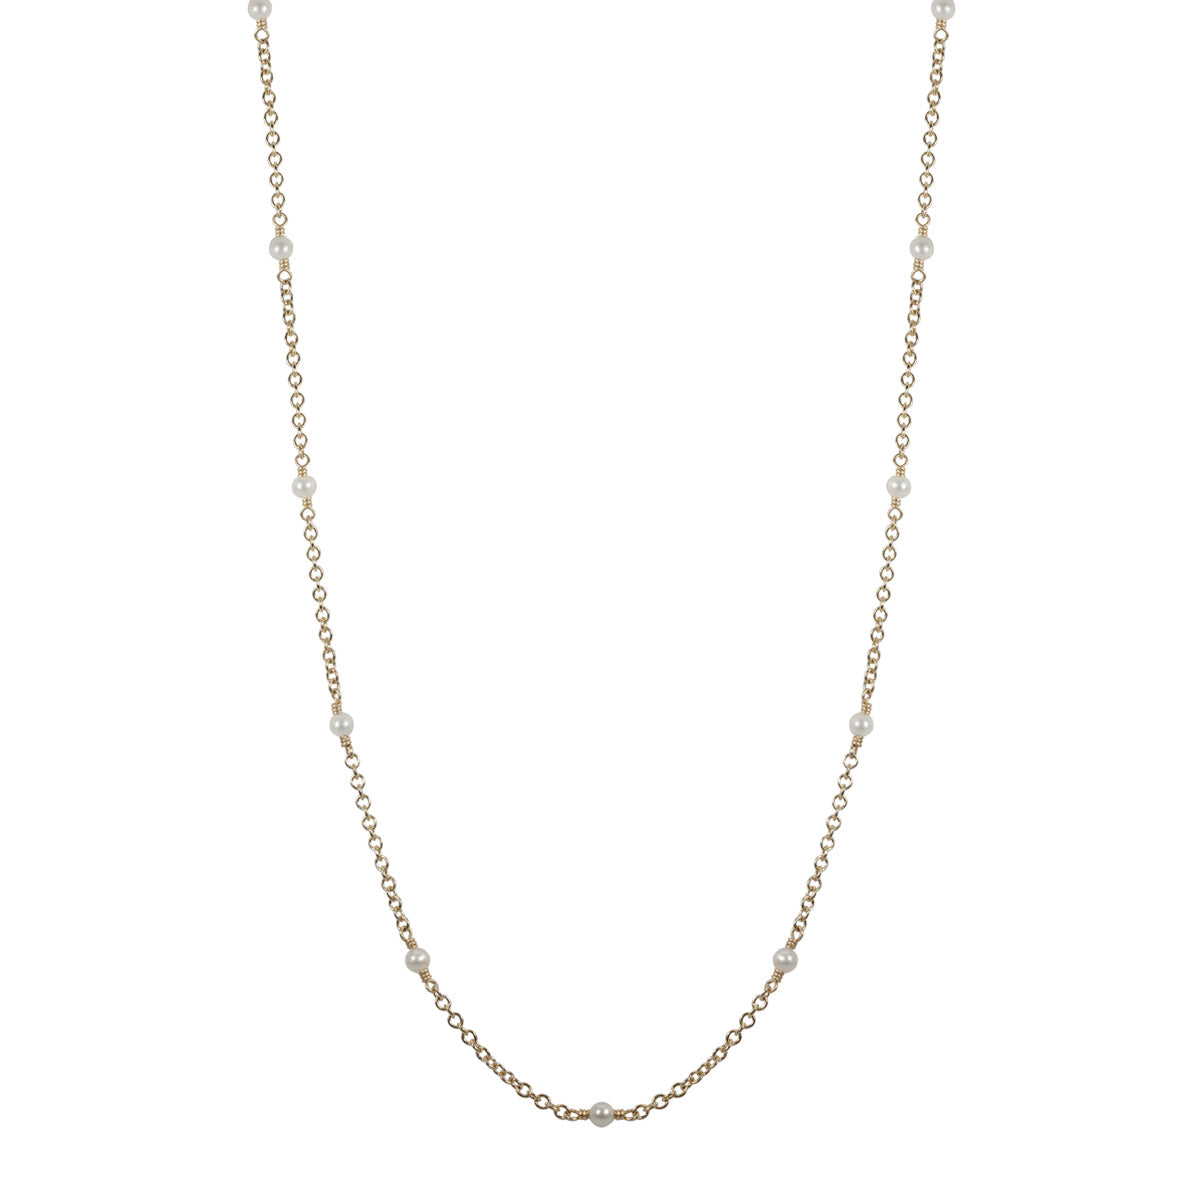 10K Gold Simple Beaded Chain with Pearl